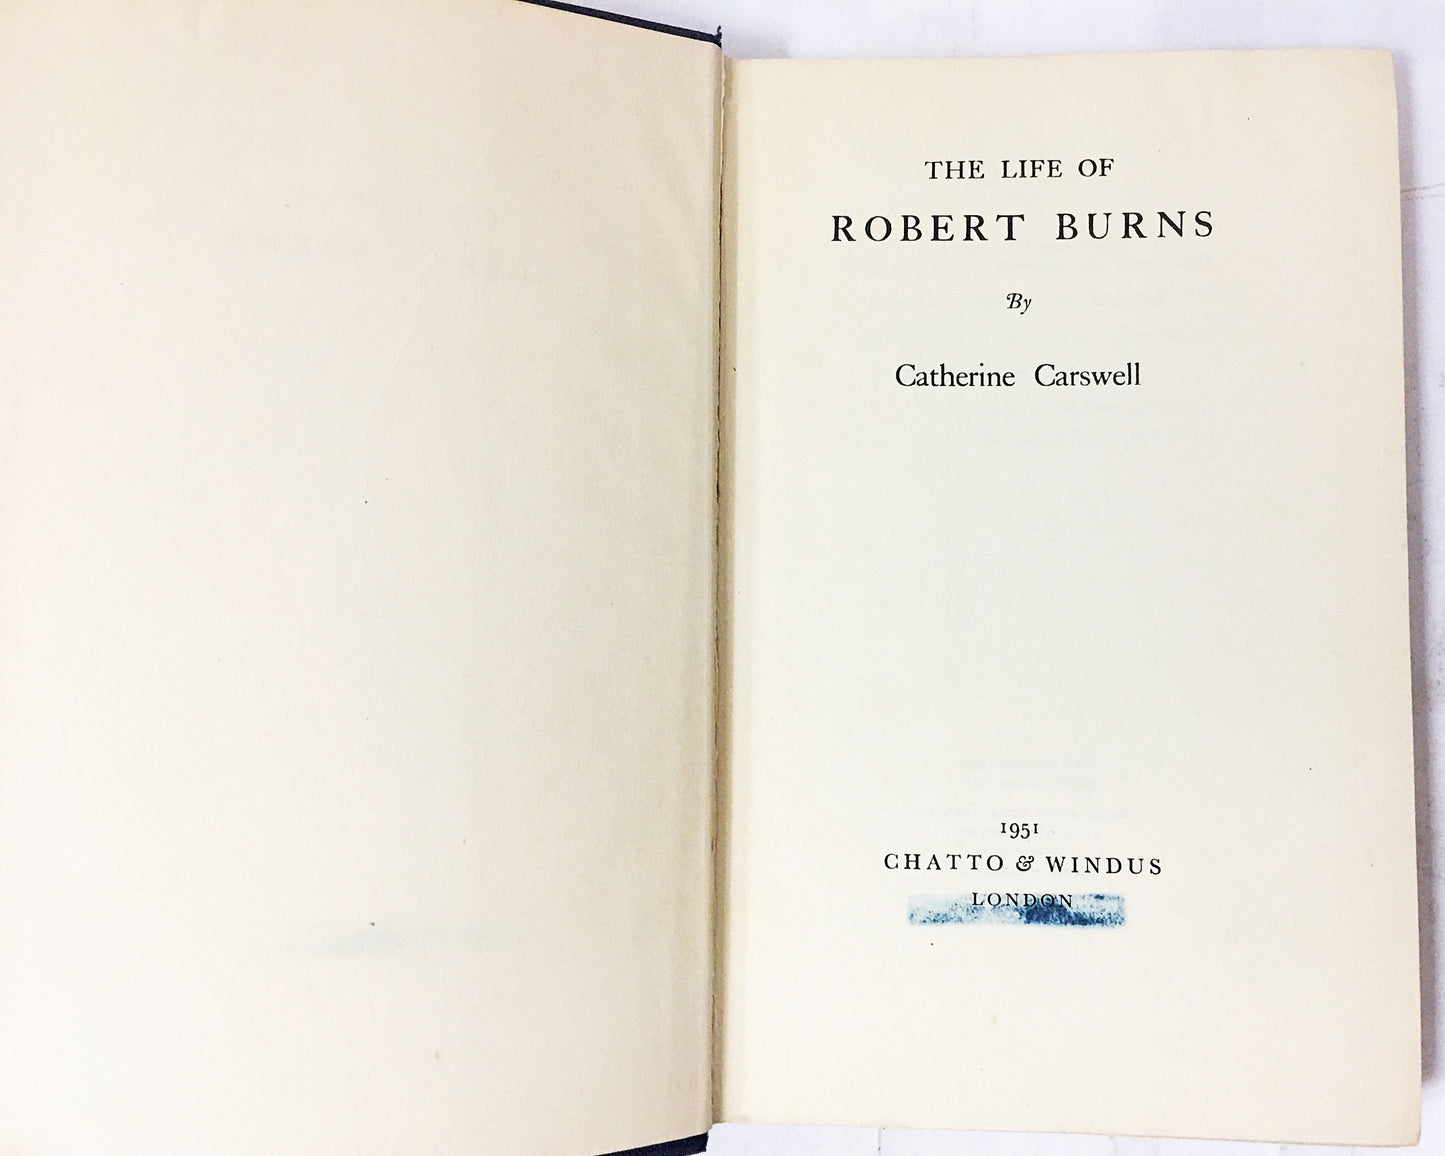 Life and works of Robert Burns Vintage book circa 1951. Scottish poet and lyricist. Poetry book lover gift. Blue Scotland decor.